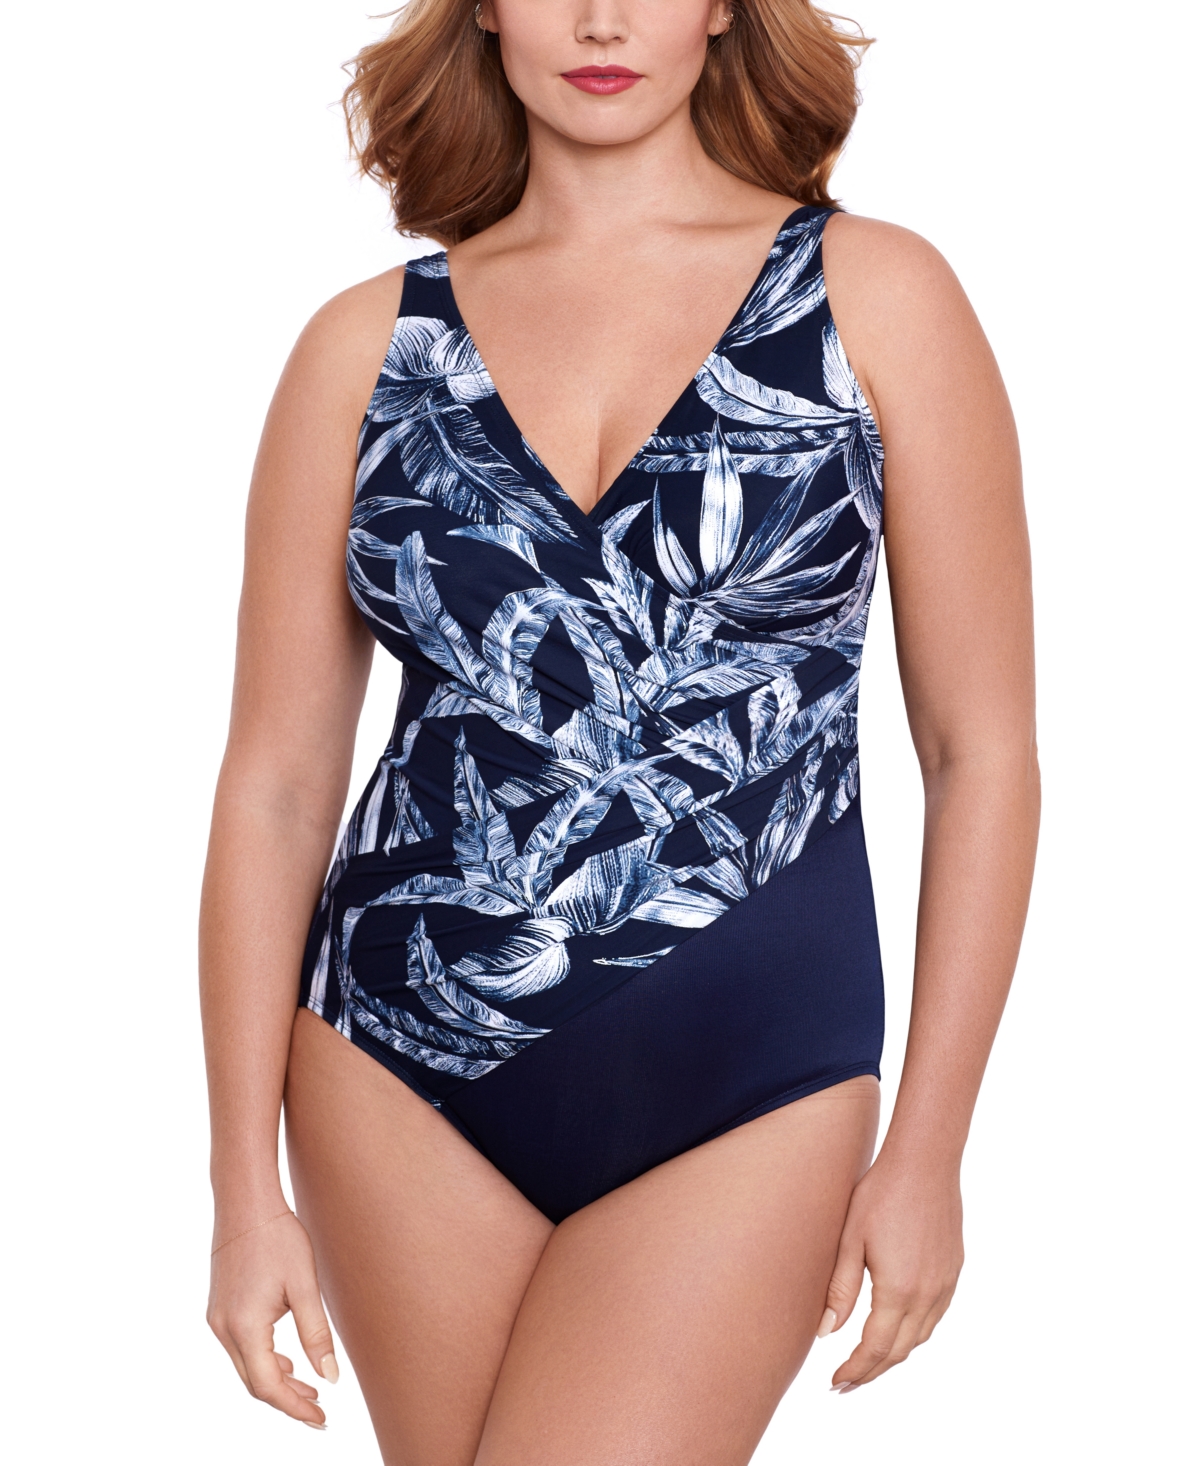 DD Cup Sanibel Ruched One Piece Swimsuit